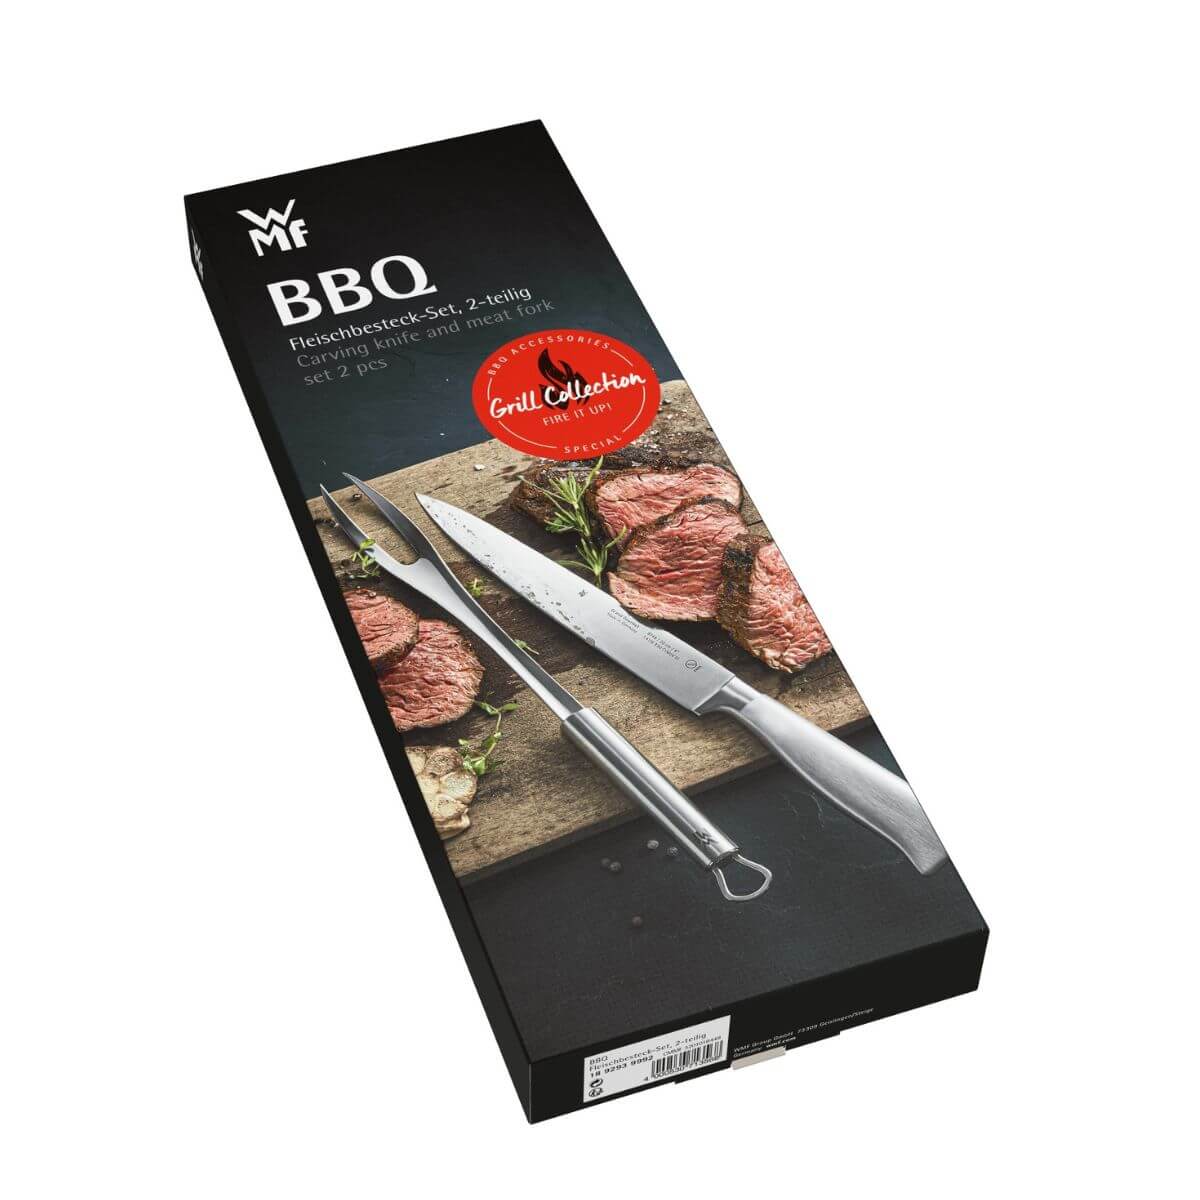 WMF BBQ Carving Knife & Meat Fork Set 2pce